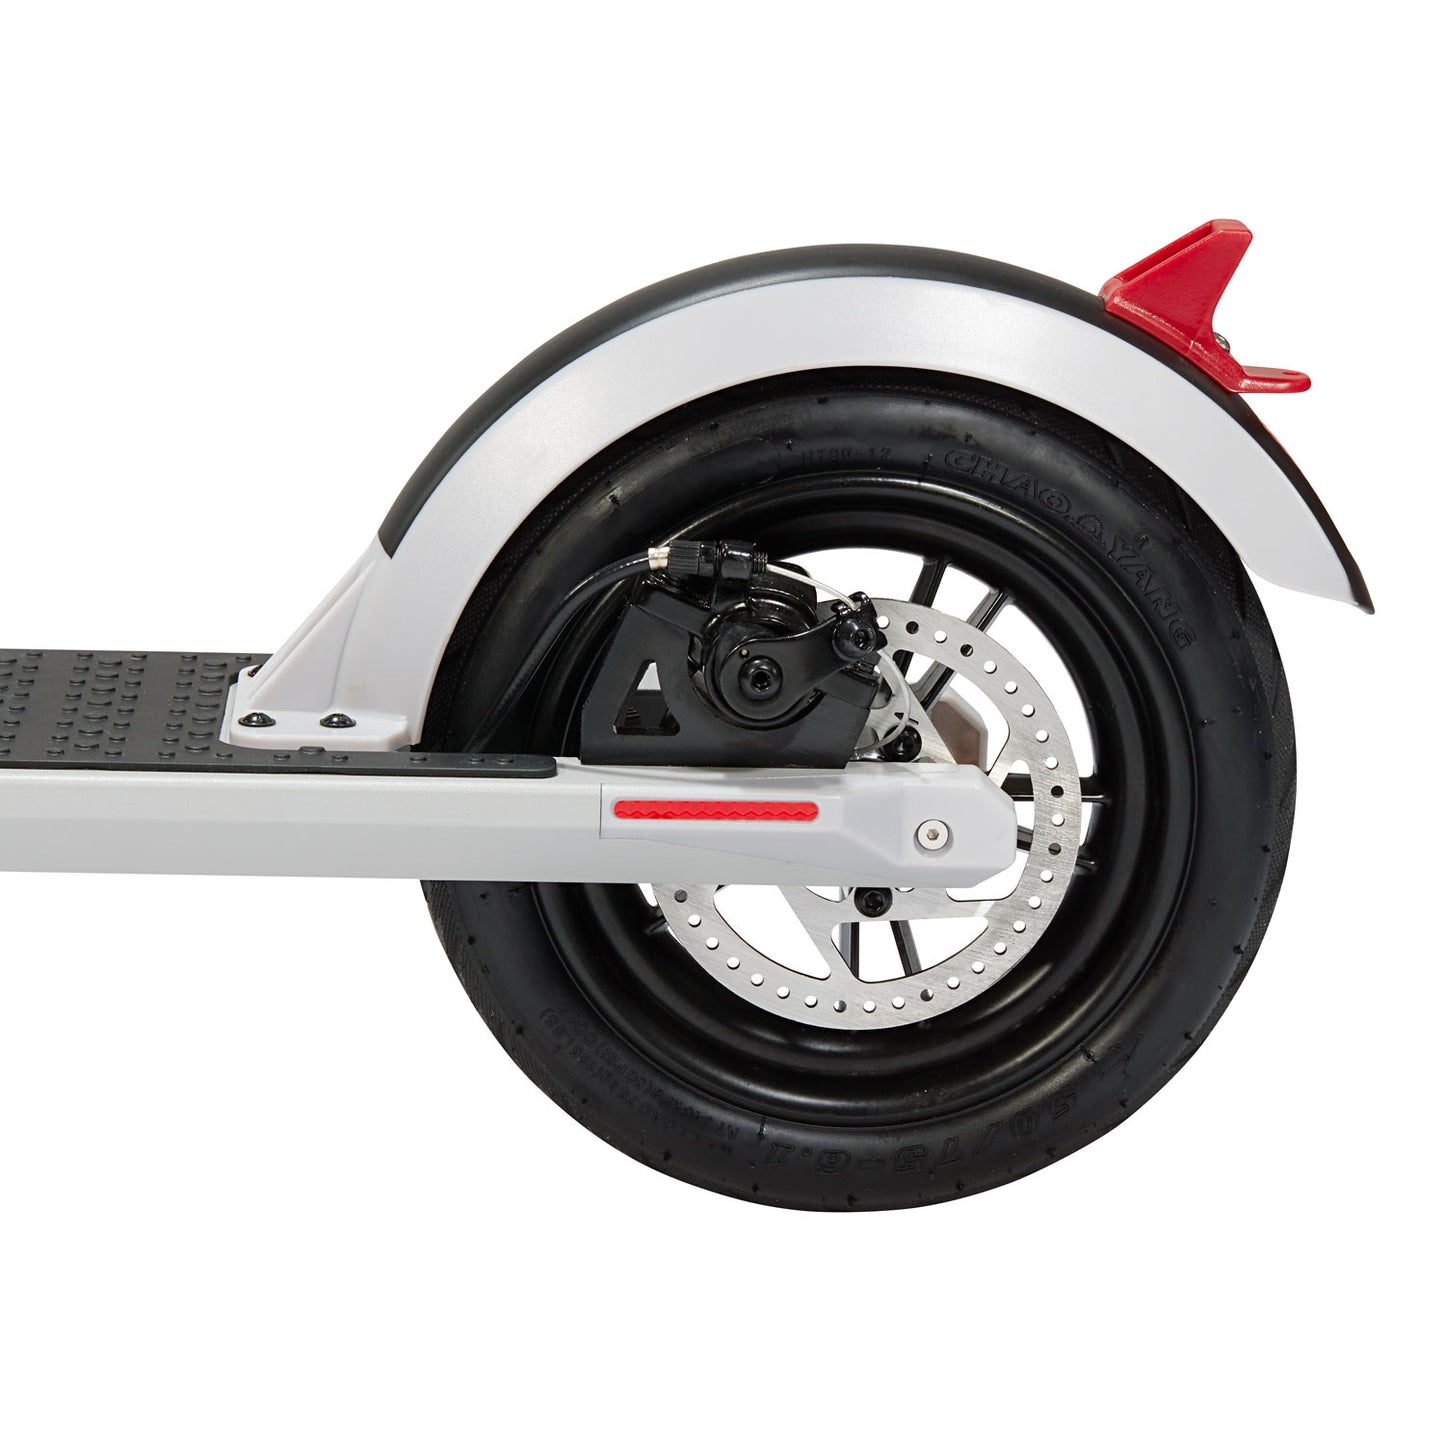 GoTrax XR Ultra Electric Scooter